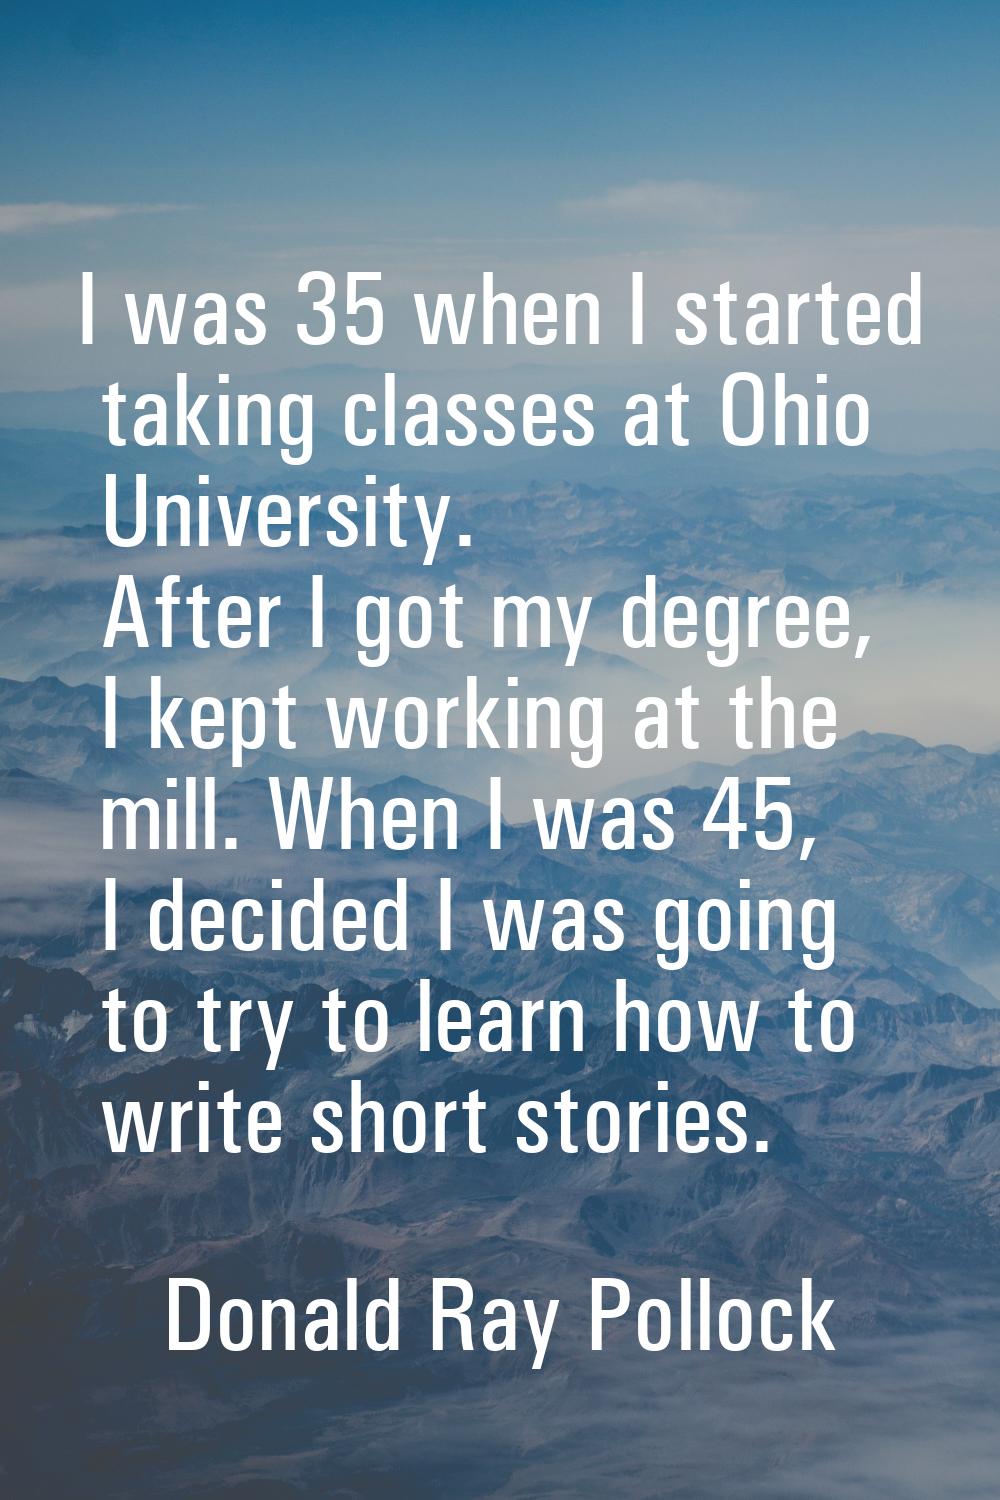 I was 35 when I started taking classes at Ohio University. After I got my degree, I kept working at